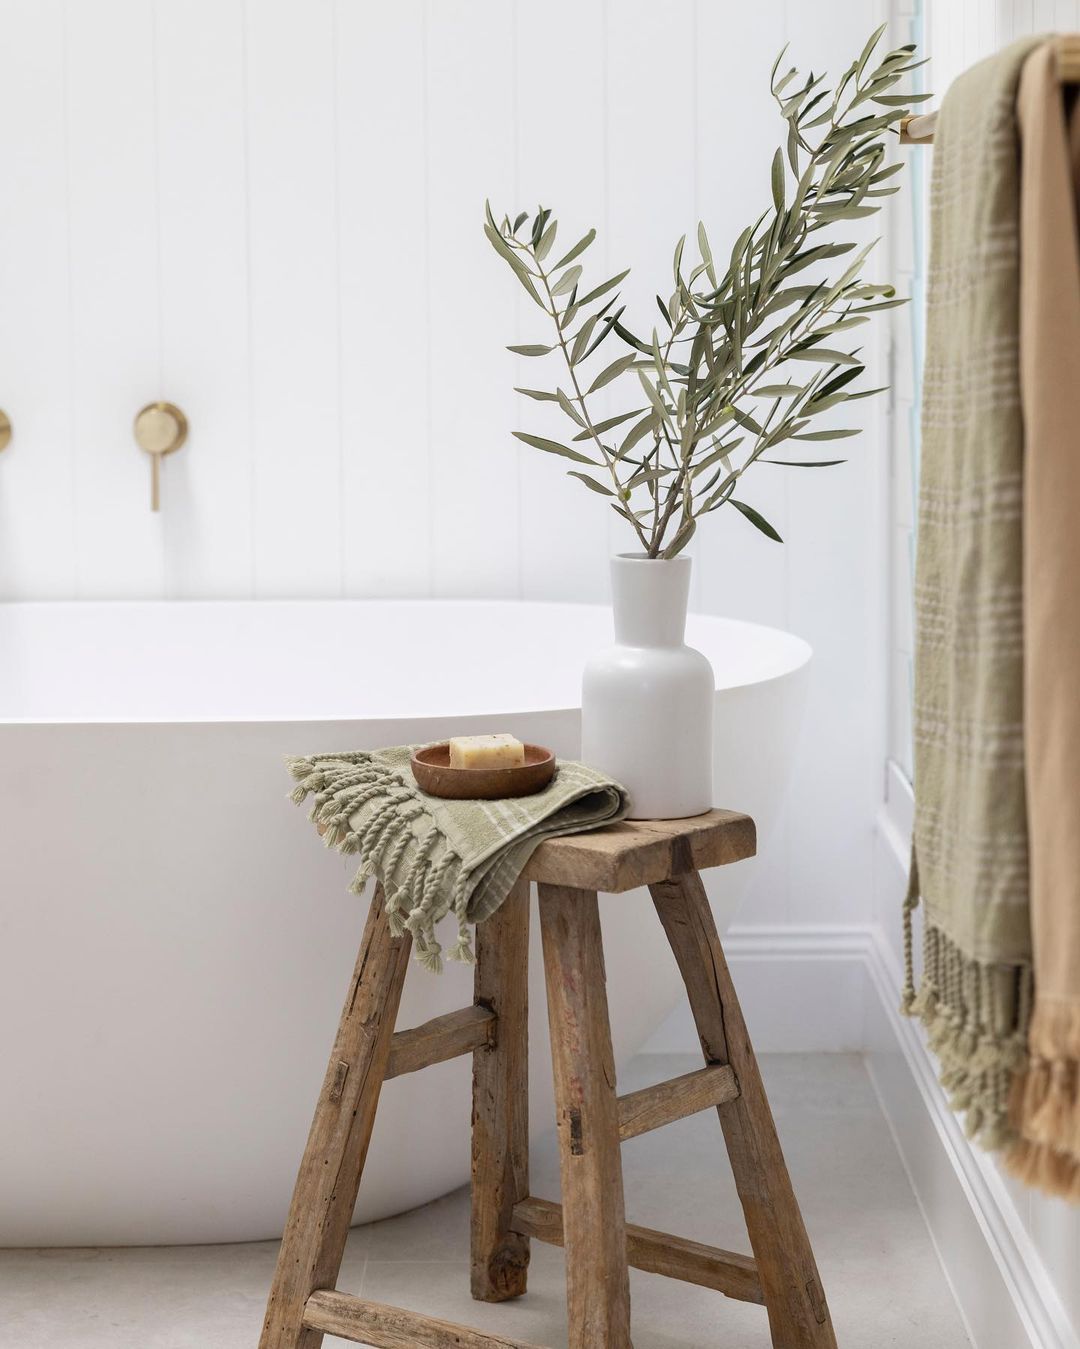 The simple additions for relaxing:
bathroom stool